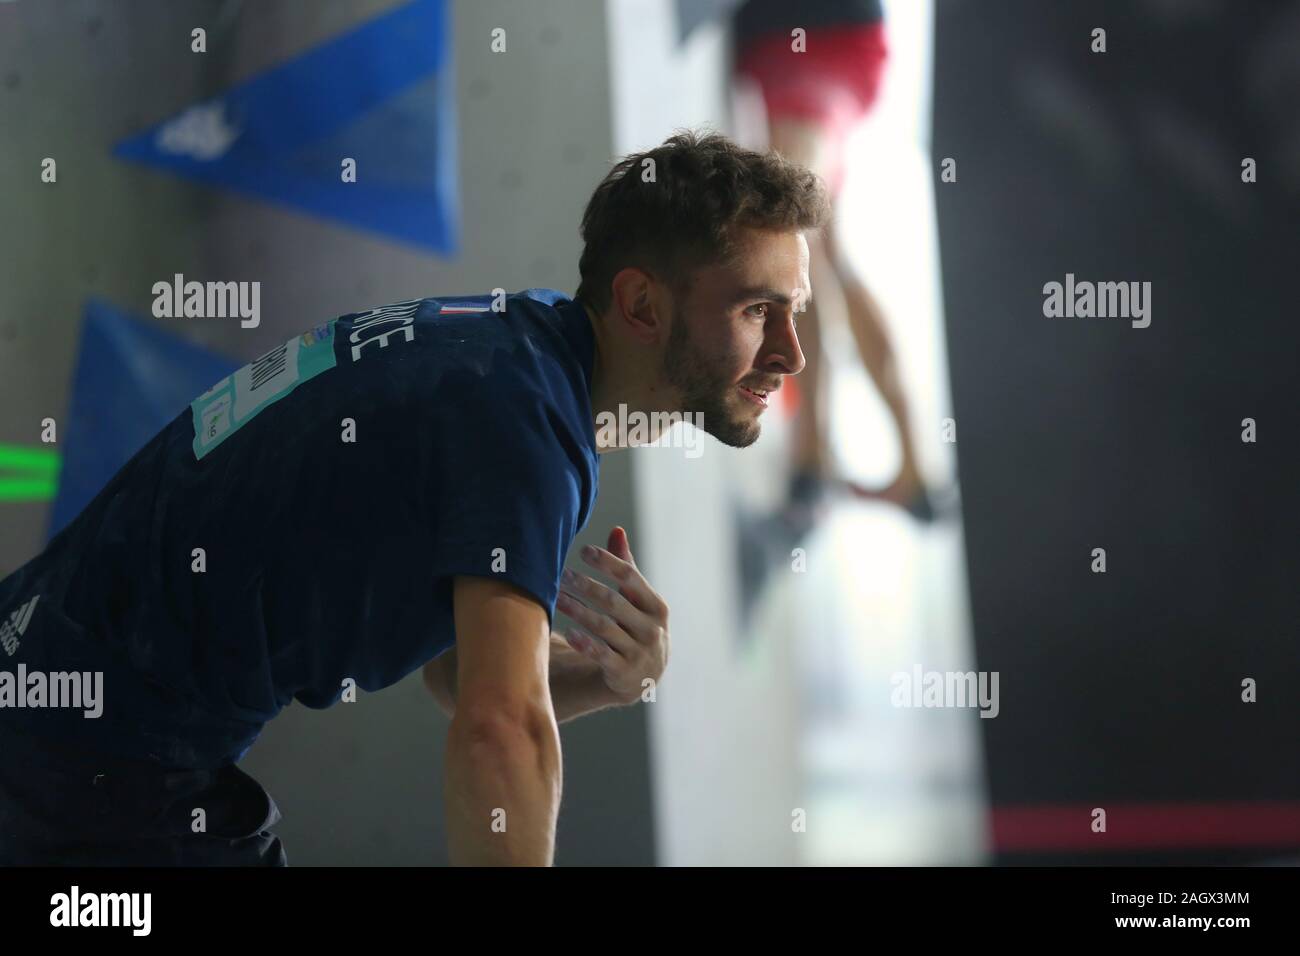 TOULOUSE, FRANCE - 28 NOV 2019: Manuel Cornu during the Men's Bouldering Qualification of the Sports Climbing Combined Olympic Qualification Tournament in Toulouse, France (Photo Credit: Mickael Chavet) Stock Photo